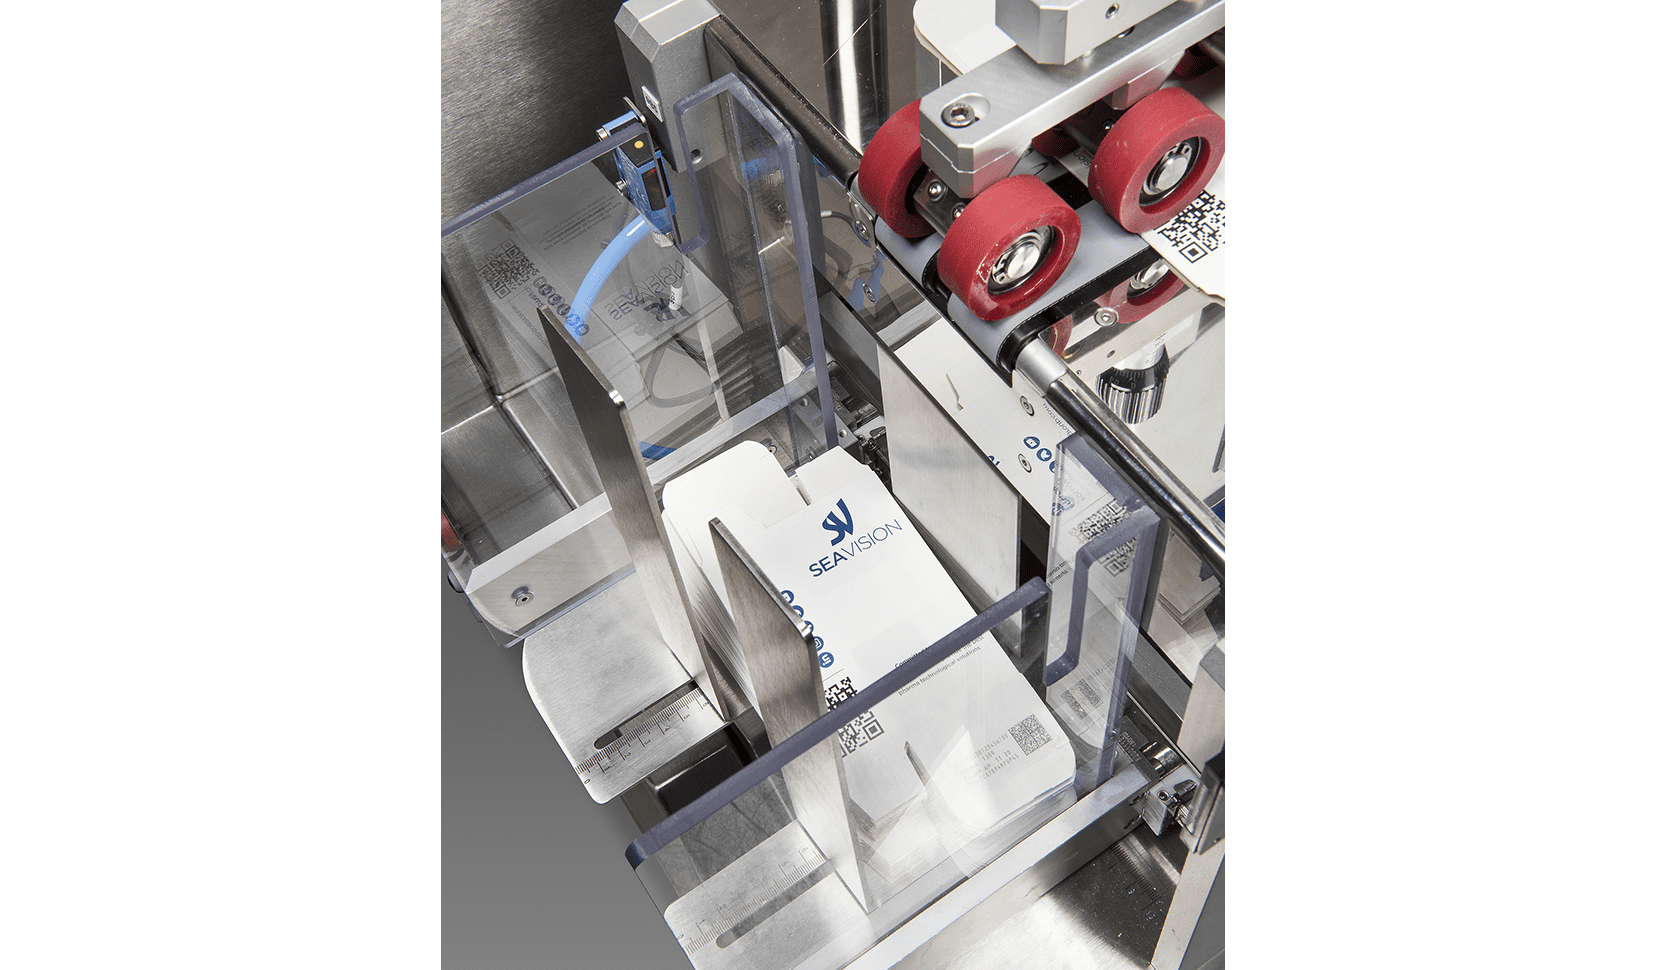 carton storage for serialization in pharmaceutical packaging